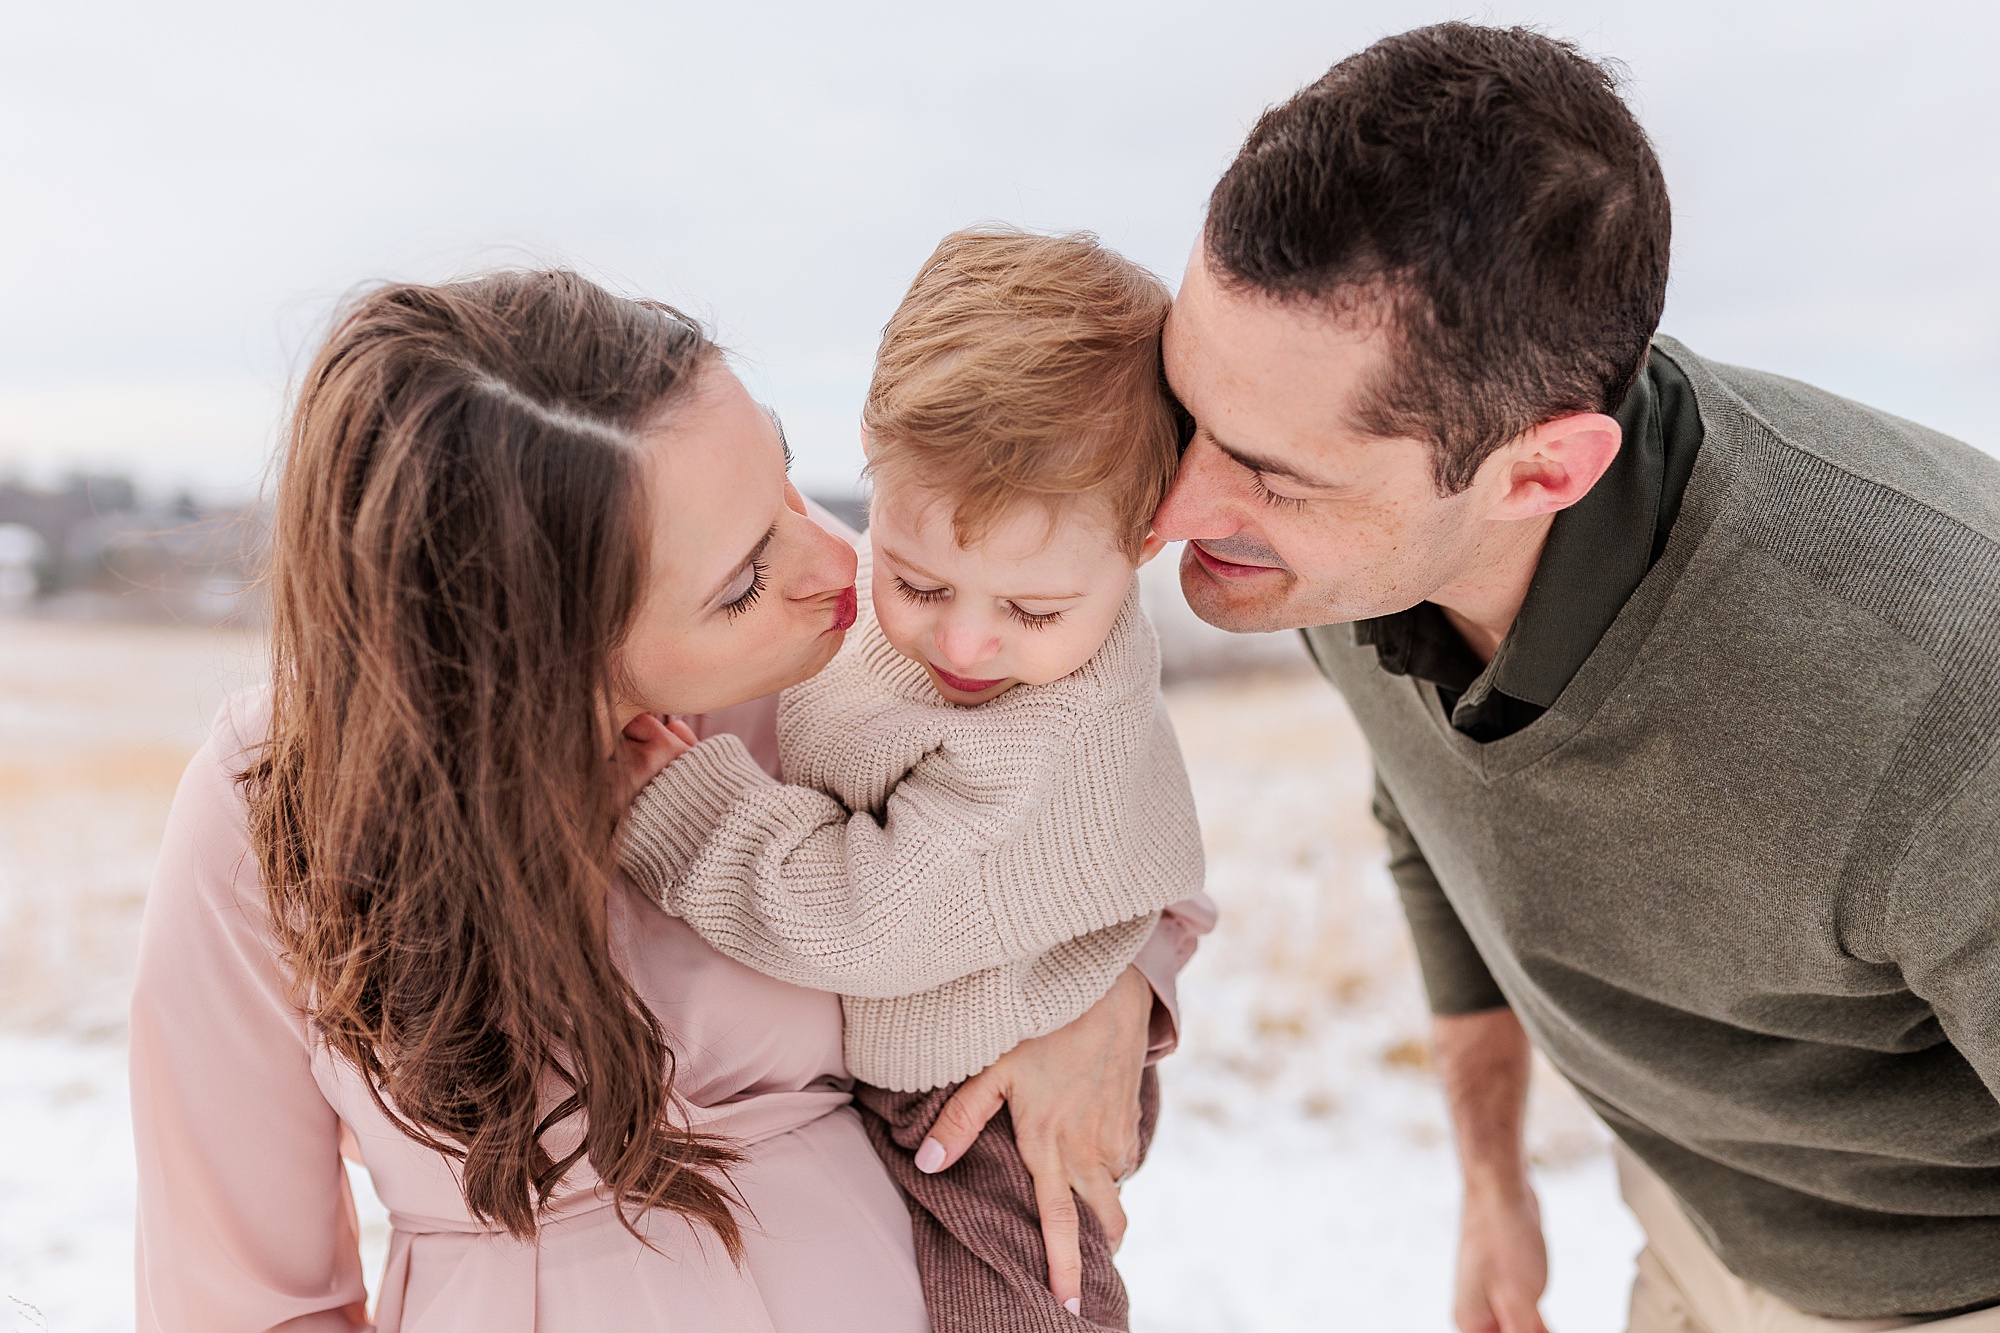 parents play with toddler during maternity photos in the snow